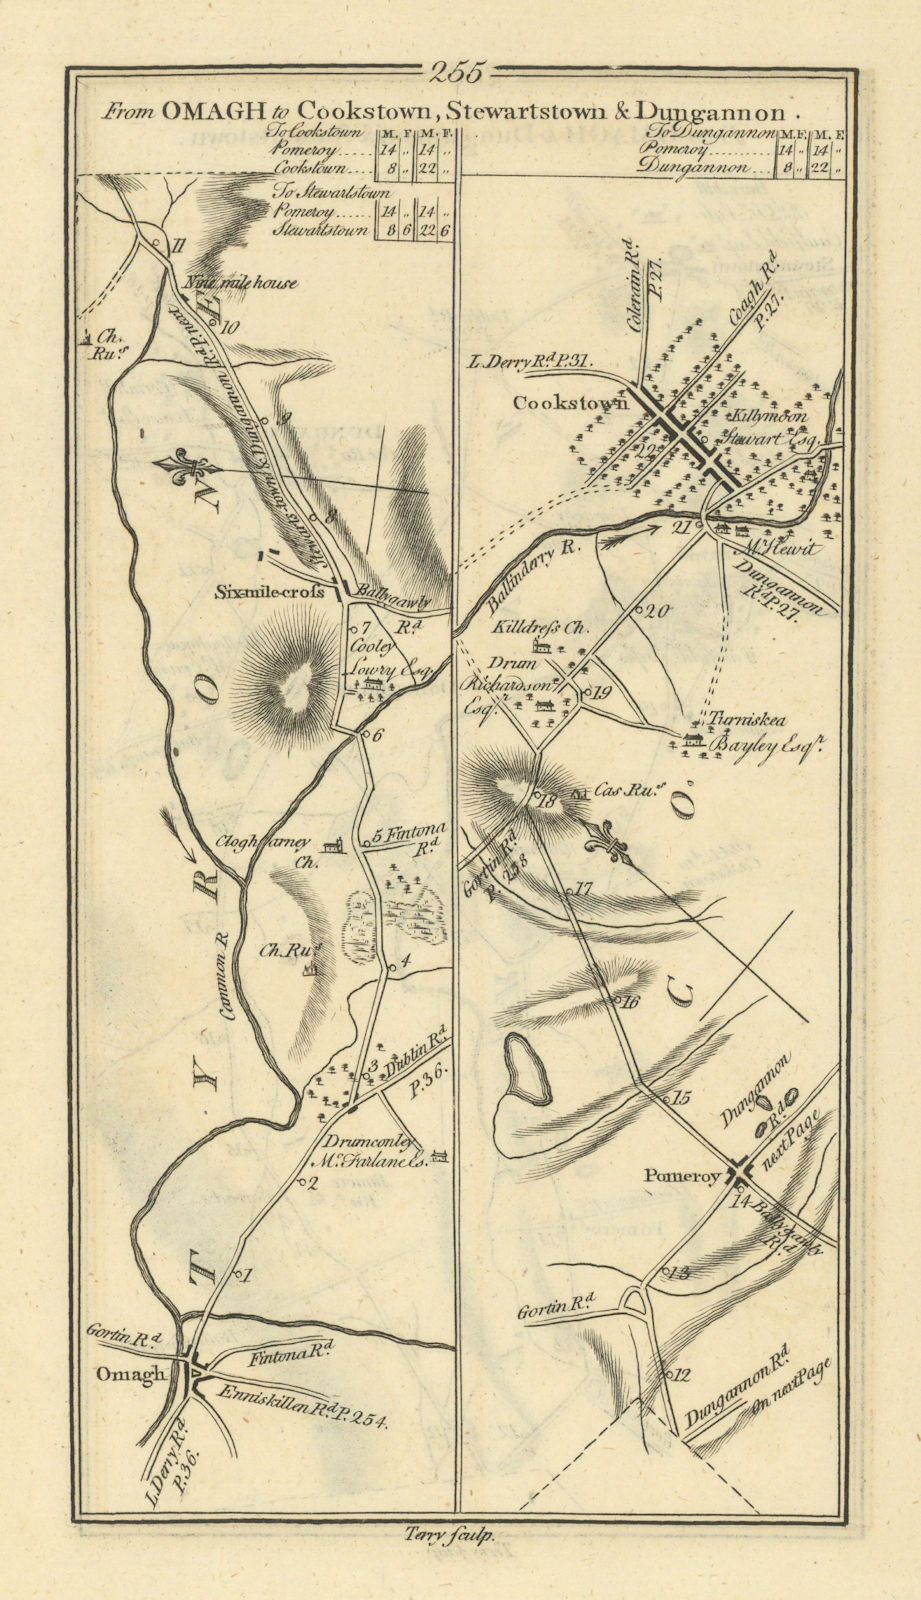 Associate Product #255 Omagh to Cookstown. Sixmilecross Pomeroy Tyrone. TAYLOR/SKINNER 1778 map